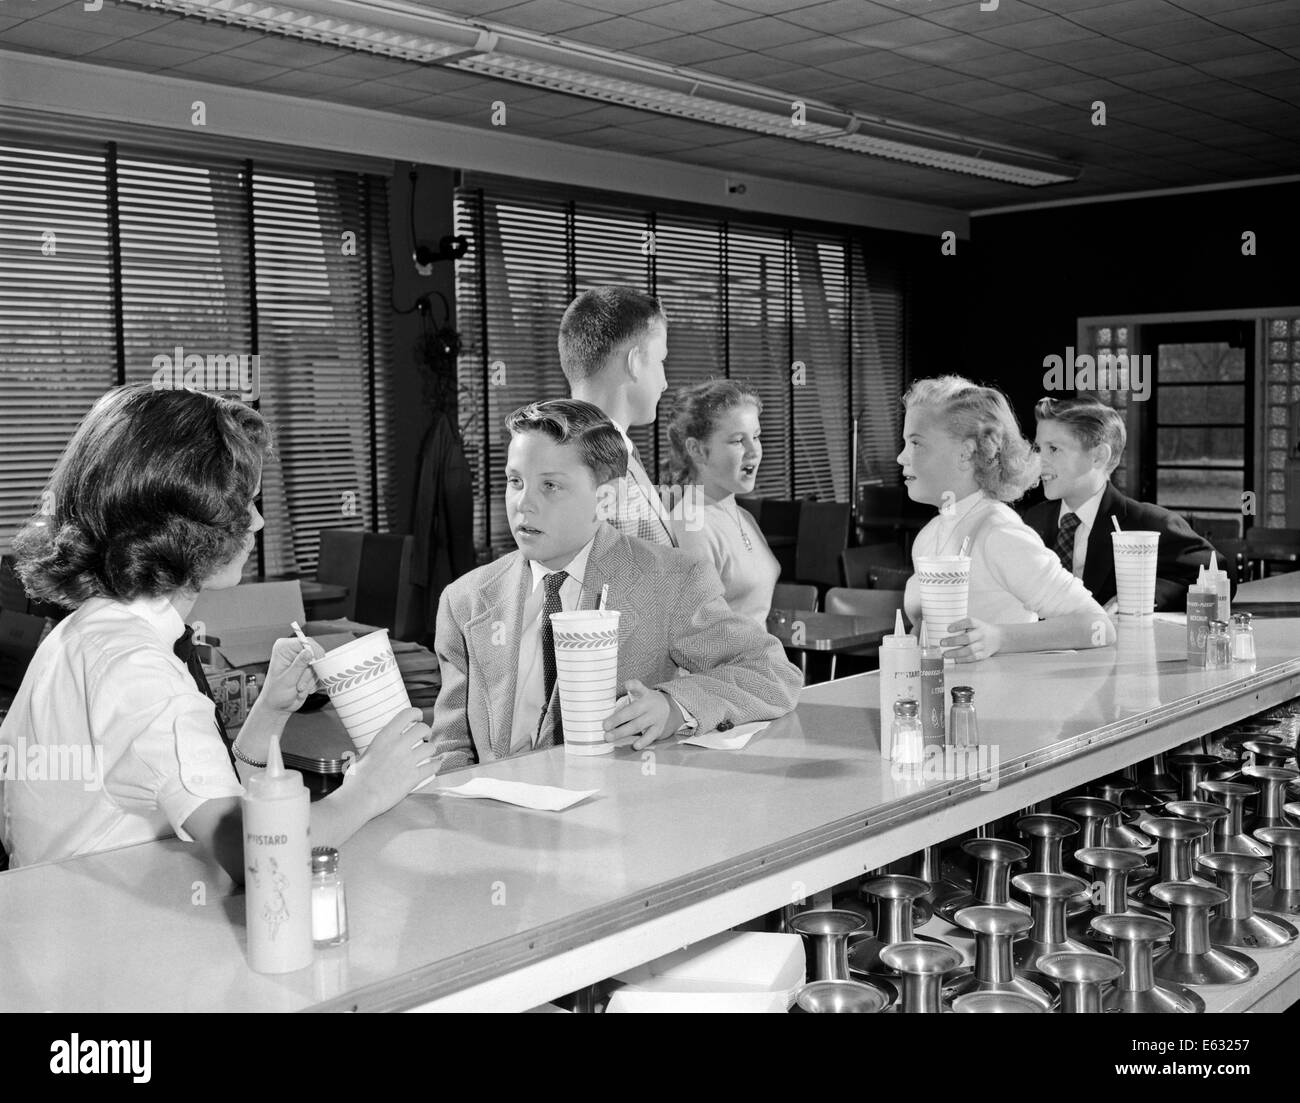 1950s YOUNG TEENAGE GIRLS AND BOYS DRINKING MILKSHAKES SITTING AT SODA FOUNTAIN COUNTER Stock Photo